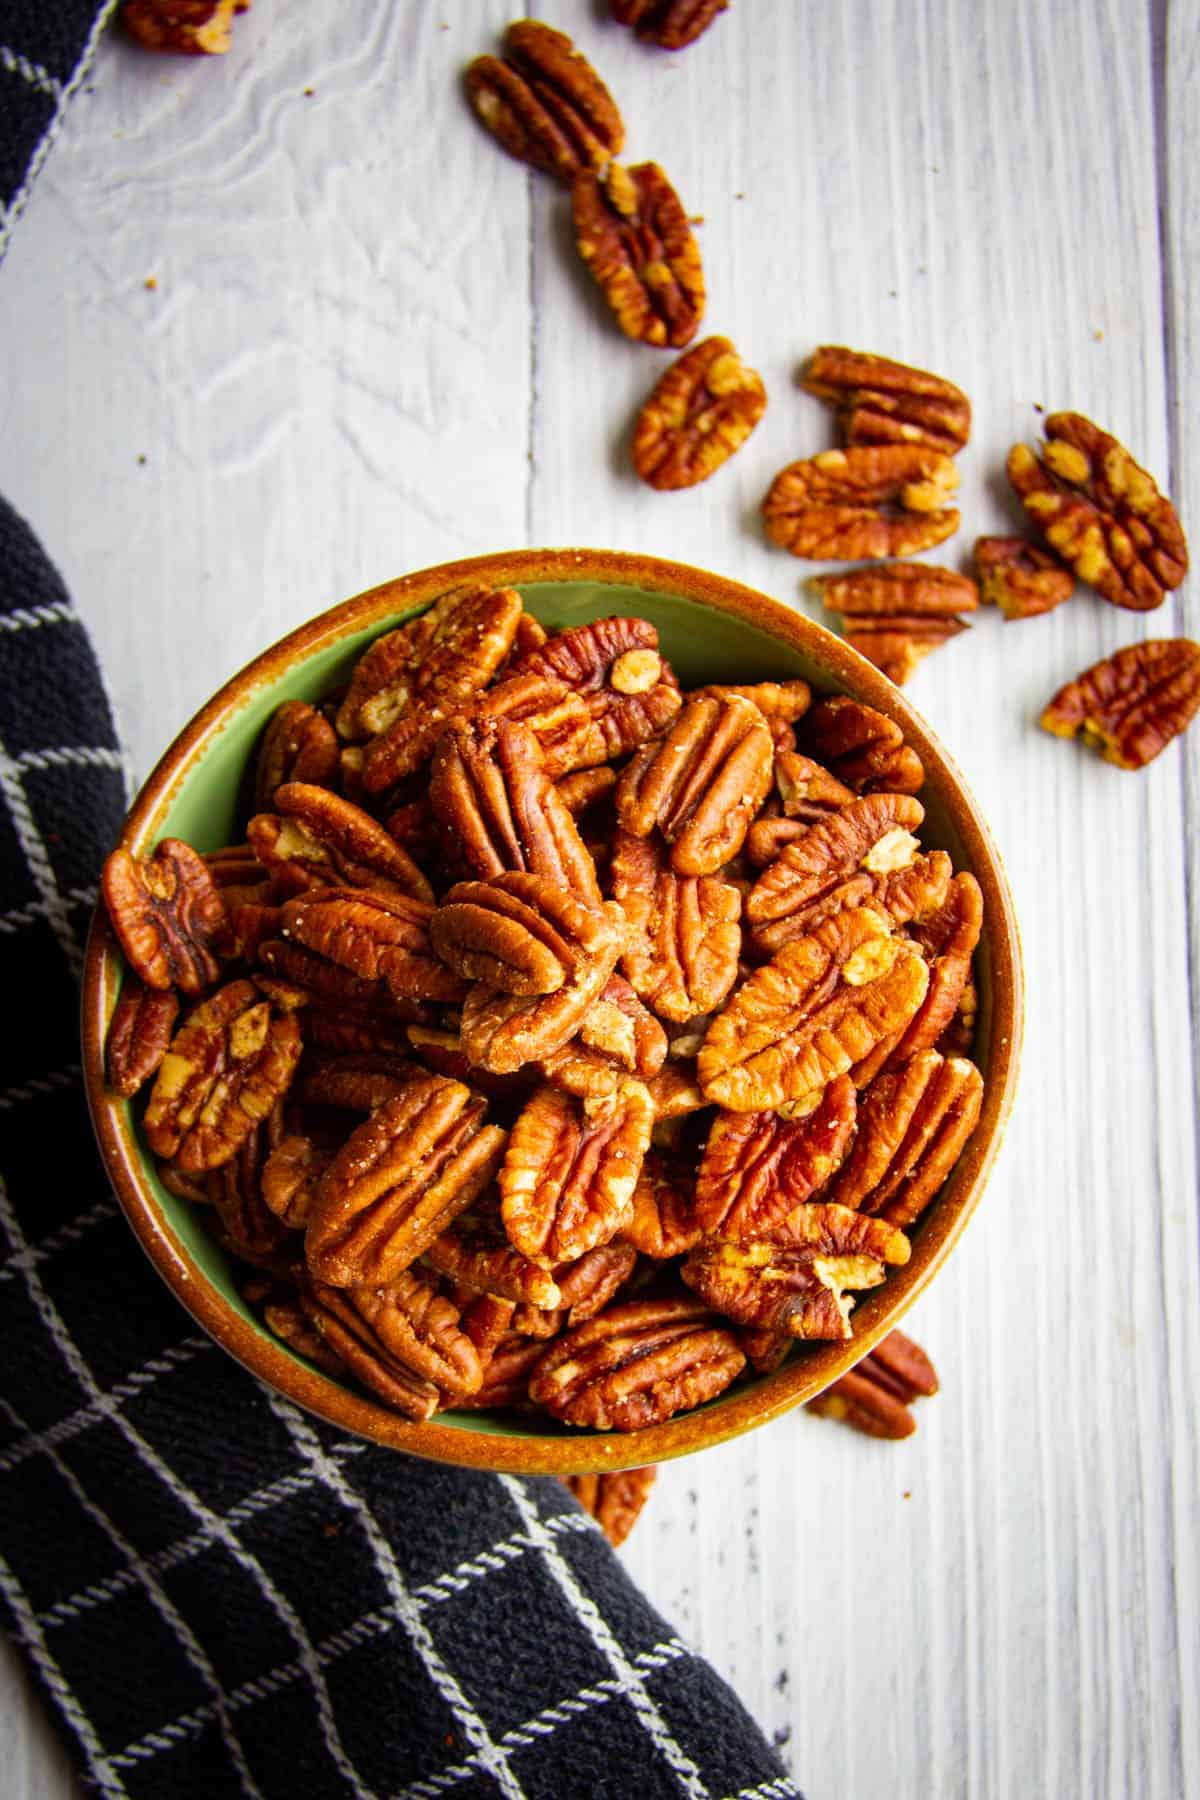 Toasted pecans in a bowl.